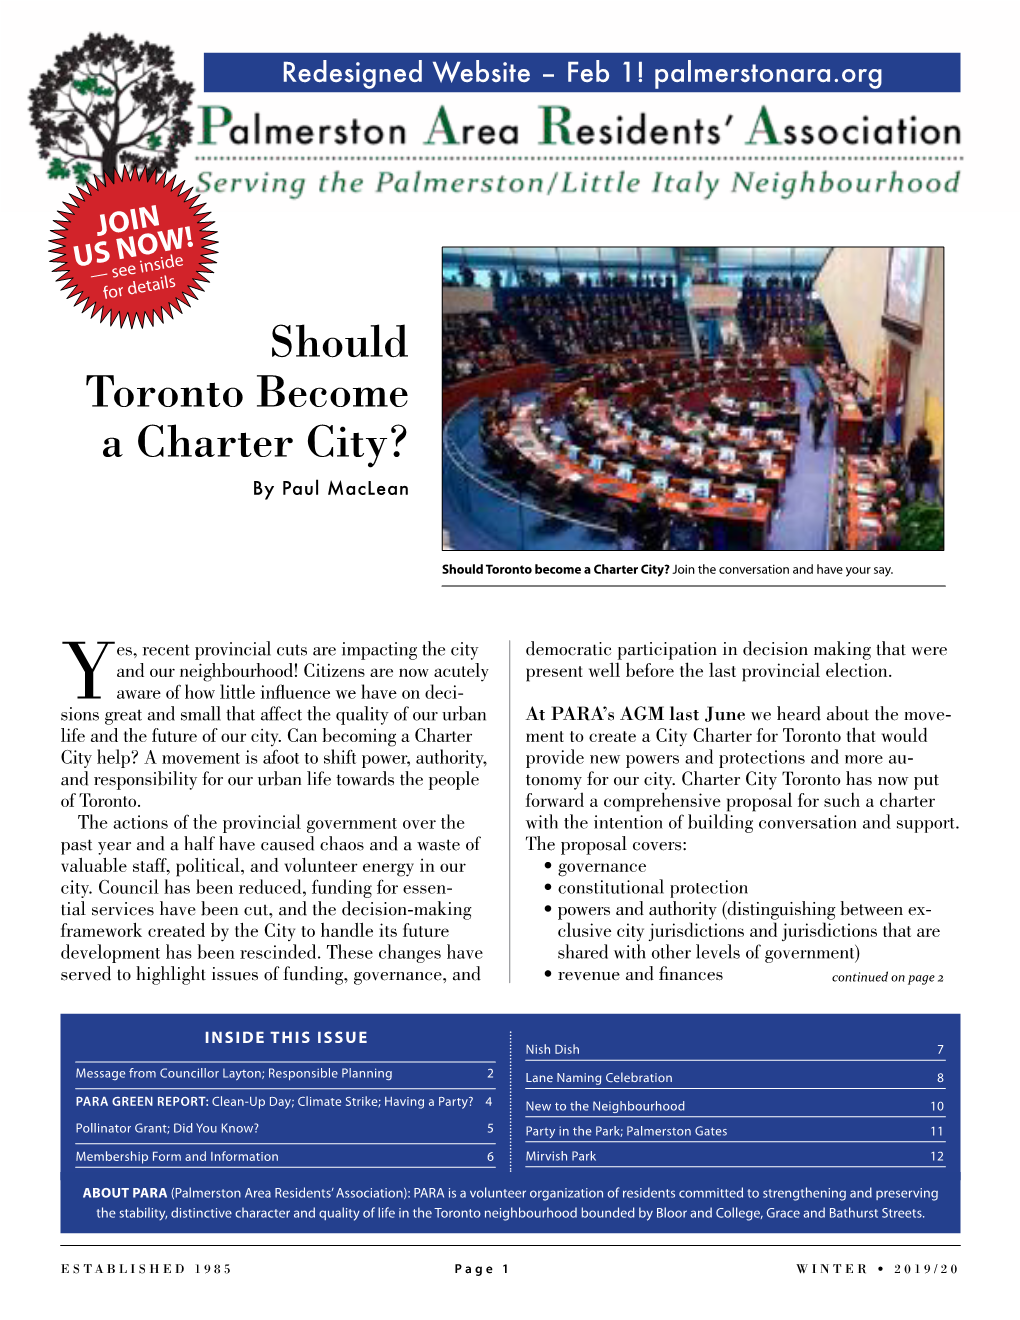 Should Toronto Become a Charter City? by Paul Maclean